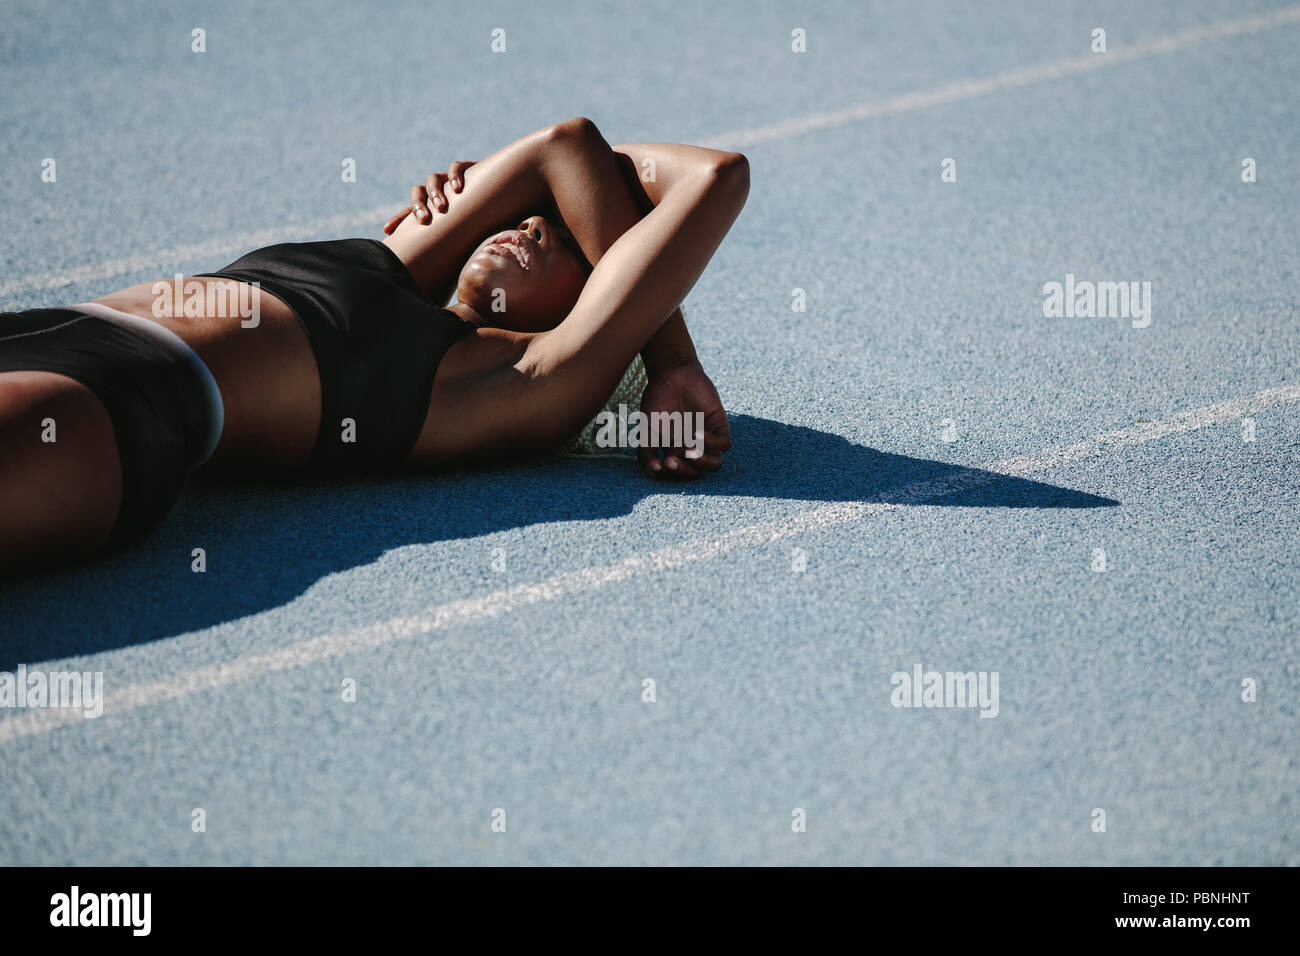 Woman athlete lying on the running track relaxing after workout. Female sprinter resting after workout lying on track on a sunny day. Stock Photo